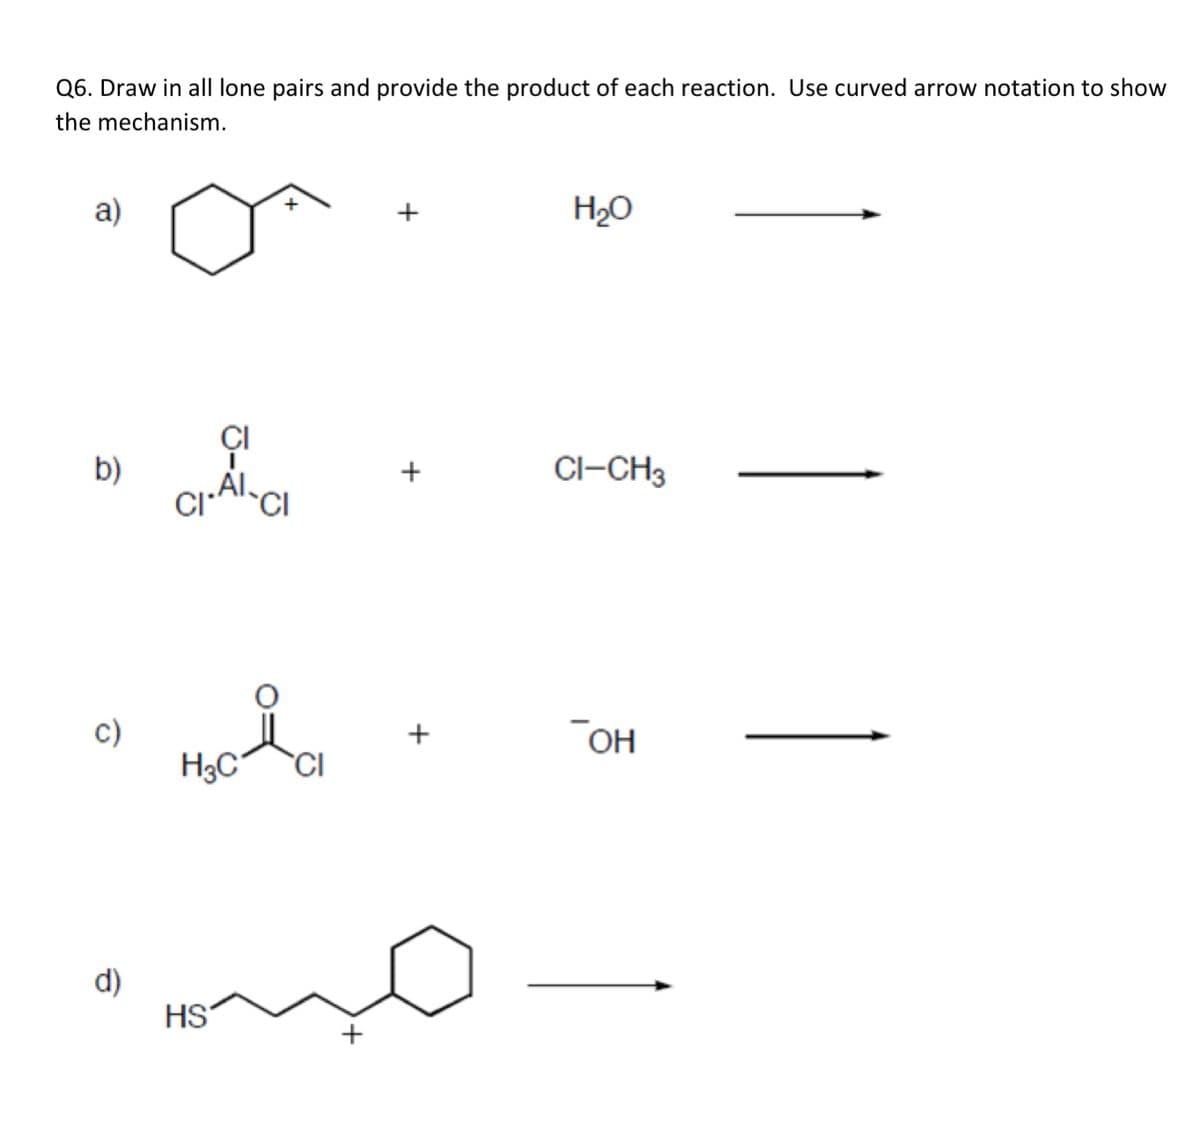 Q6. Draw in all lone pairs and provide the product of each reaction. Use curved arrow notation to show
the mechanism.
a)
+
H2O
CI
b)
+
Cl–CH3
CI
c)
H3C
+
OH
CI
d)
HS
+
